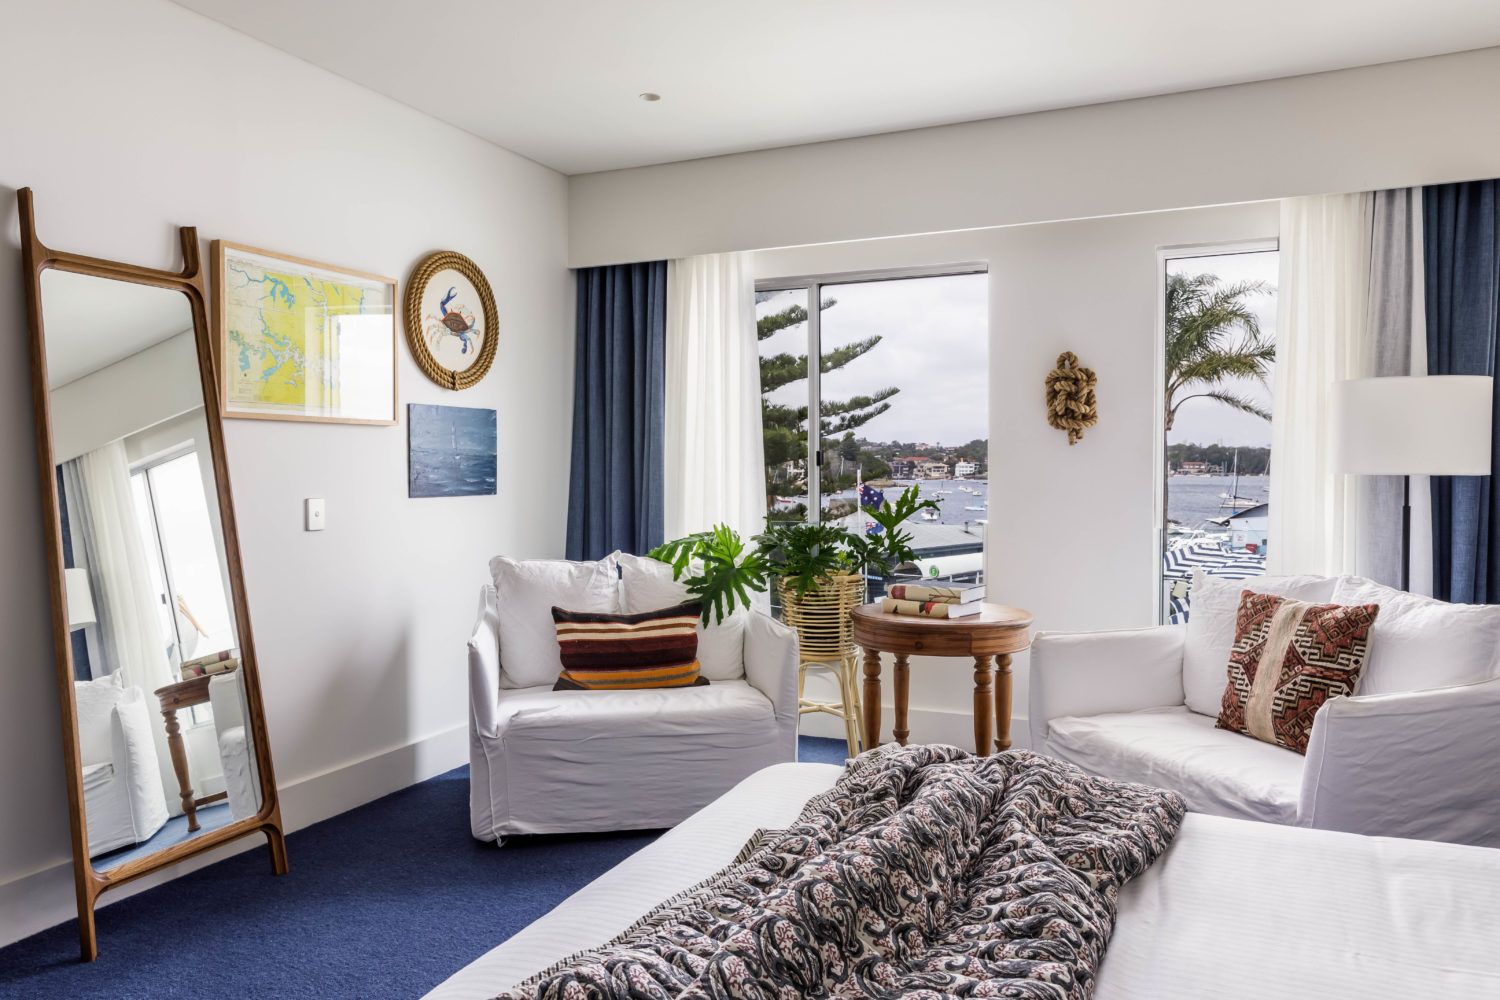 Watson's Bay Boutique Hotel offers stunning views and easy access to historic sites around Sydney.